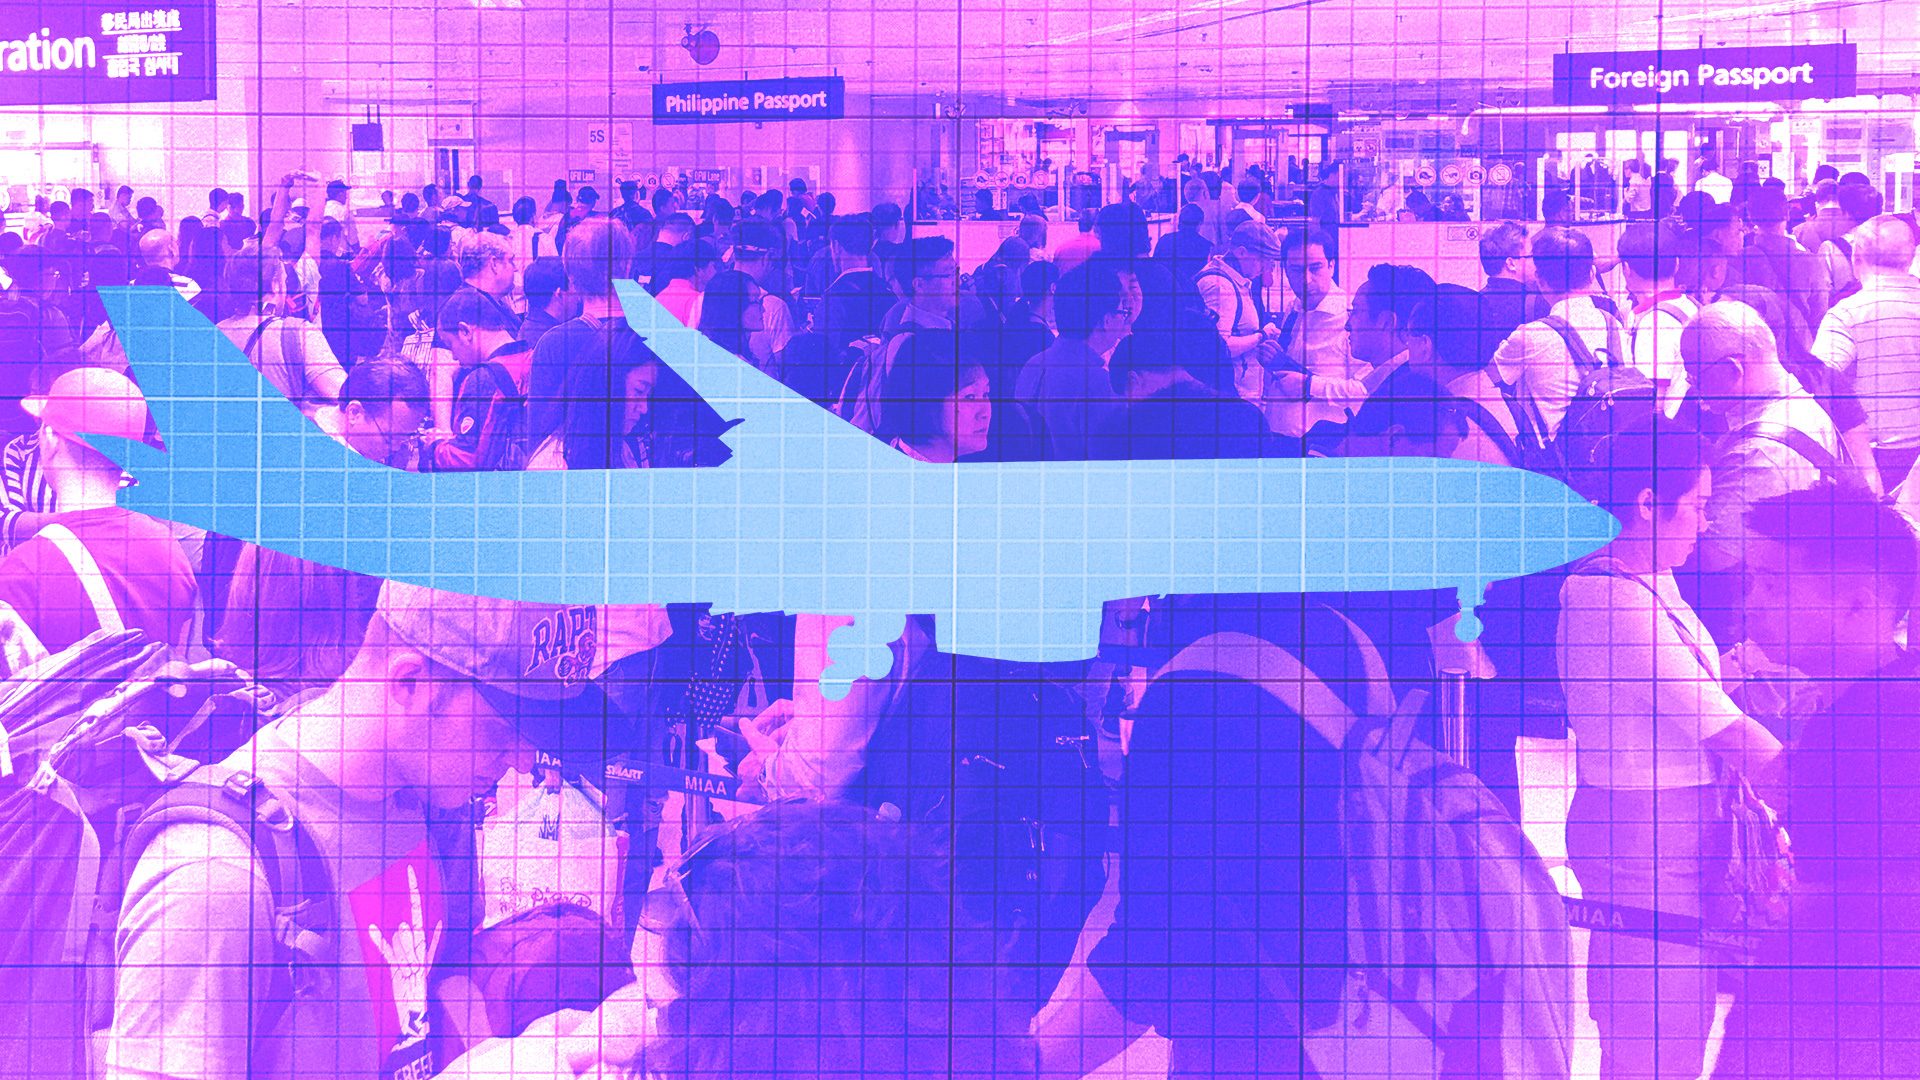 [OPINION] Are holiday travel woes here to stay? Not if we plan using complexity science